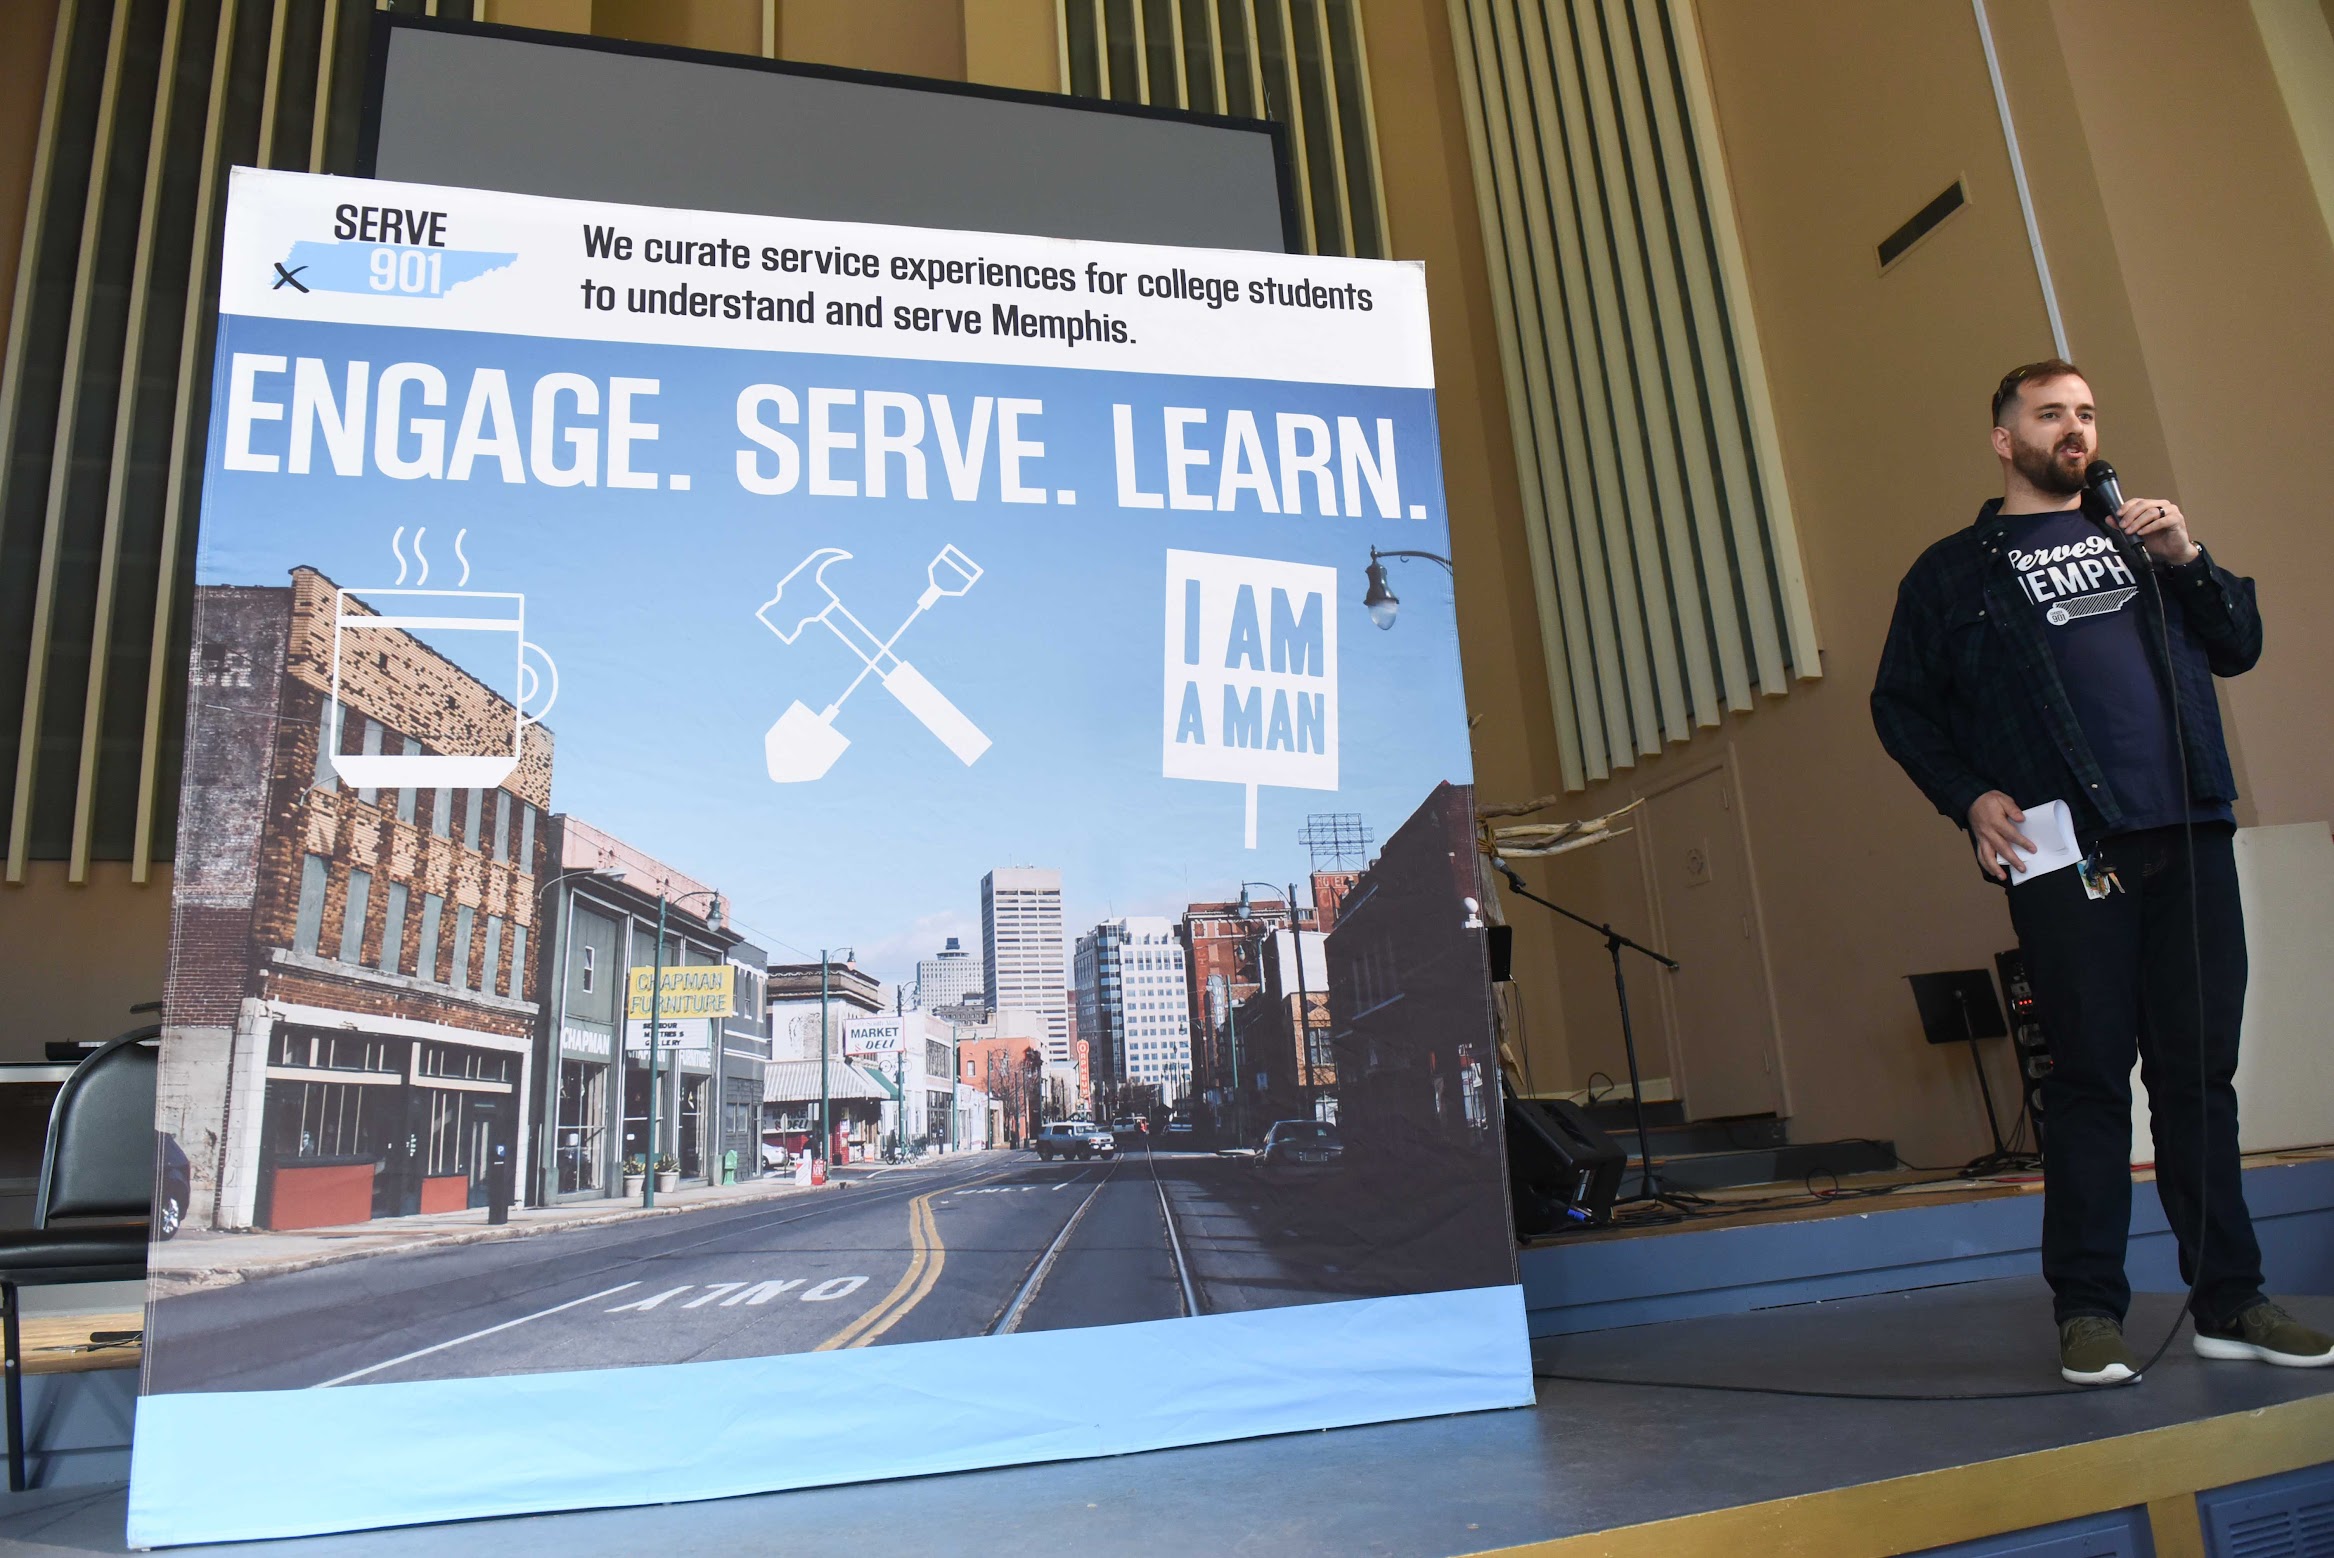 A man standing in front of a sign that says engage serve learn during spring break in Memphis.